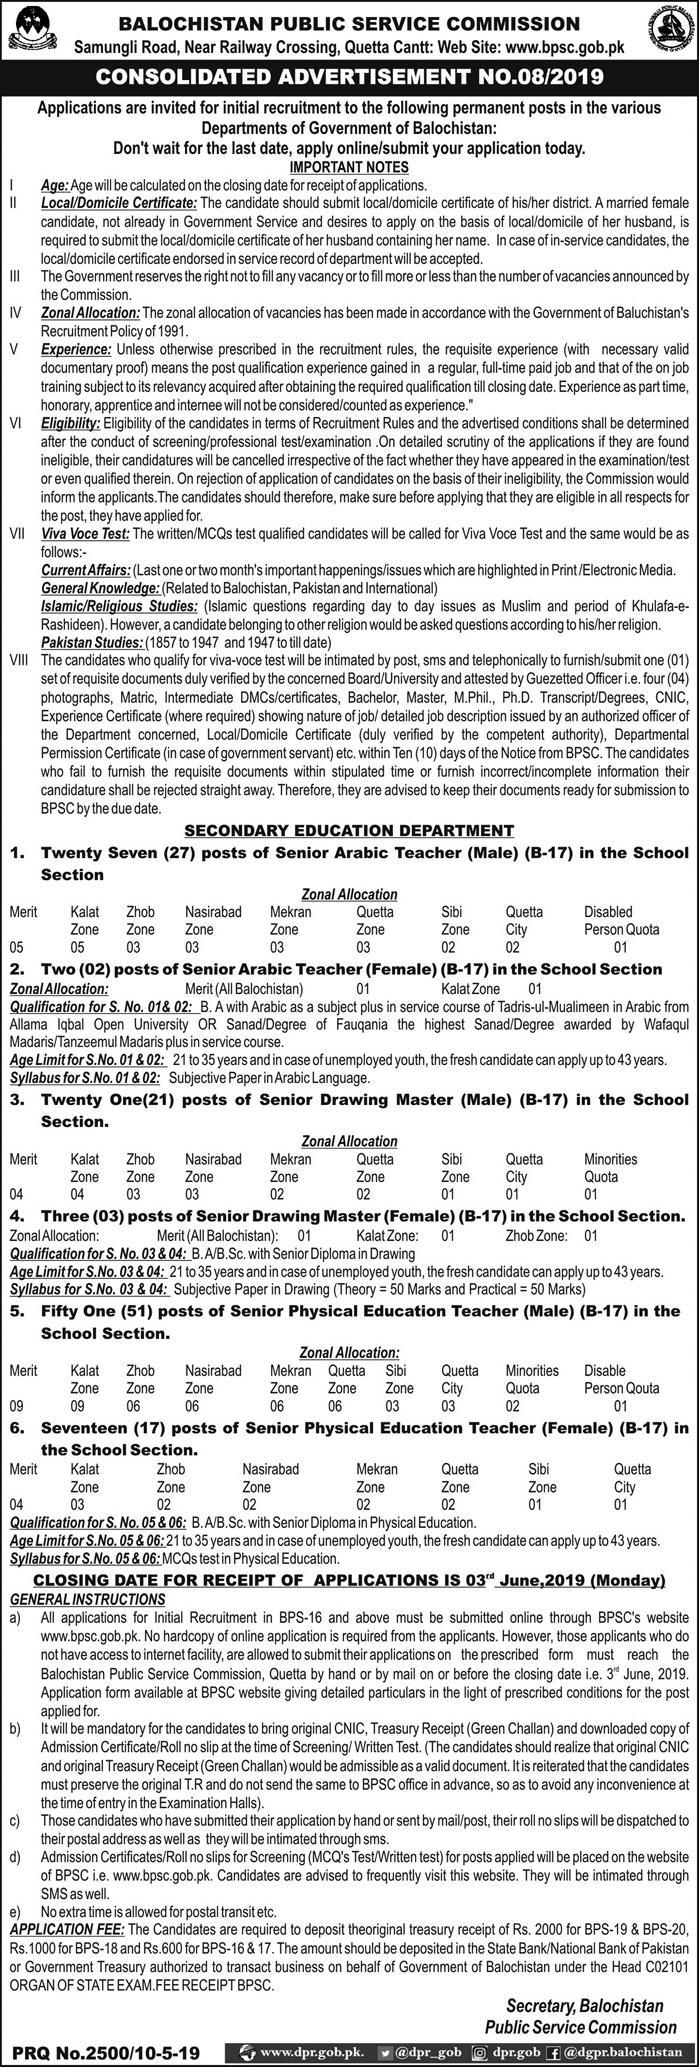 BPSC Jobs 8/2019: 121+ Teachers, PET and Drawing Masters in Secondary Education Department of Balochistan